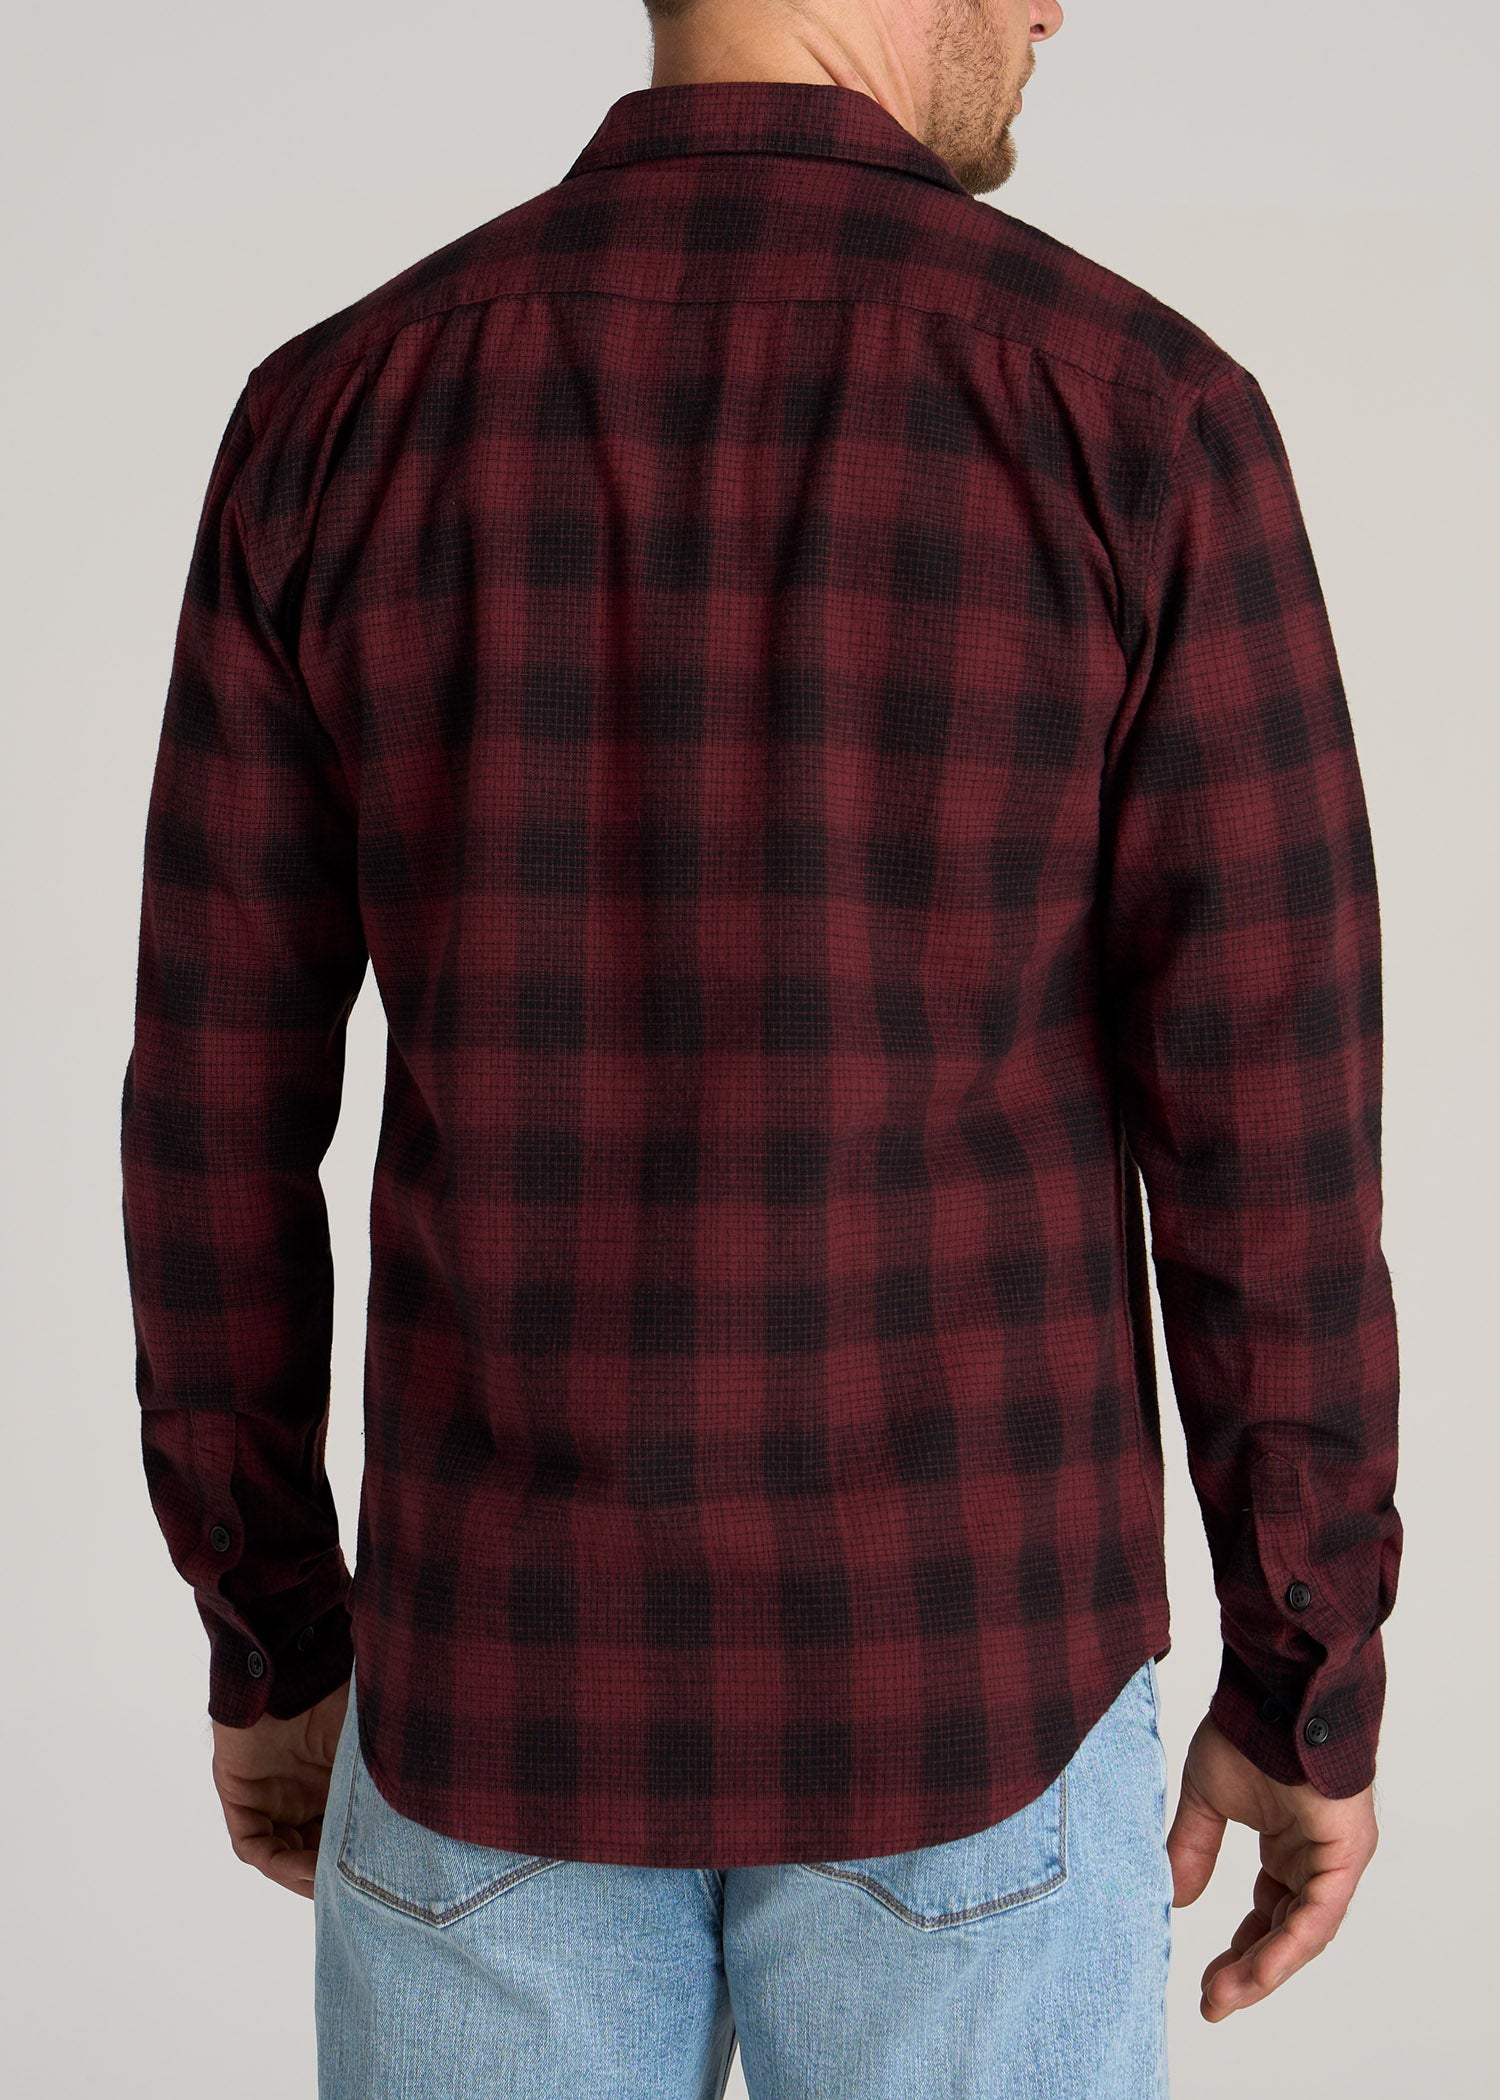 LJ&S Men's Heavy Flannel Shirt in Army Plaid-Black & Red –